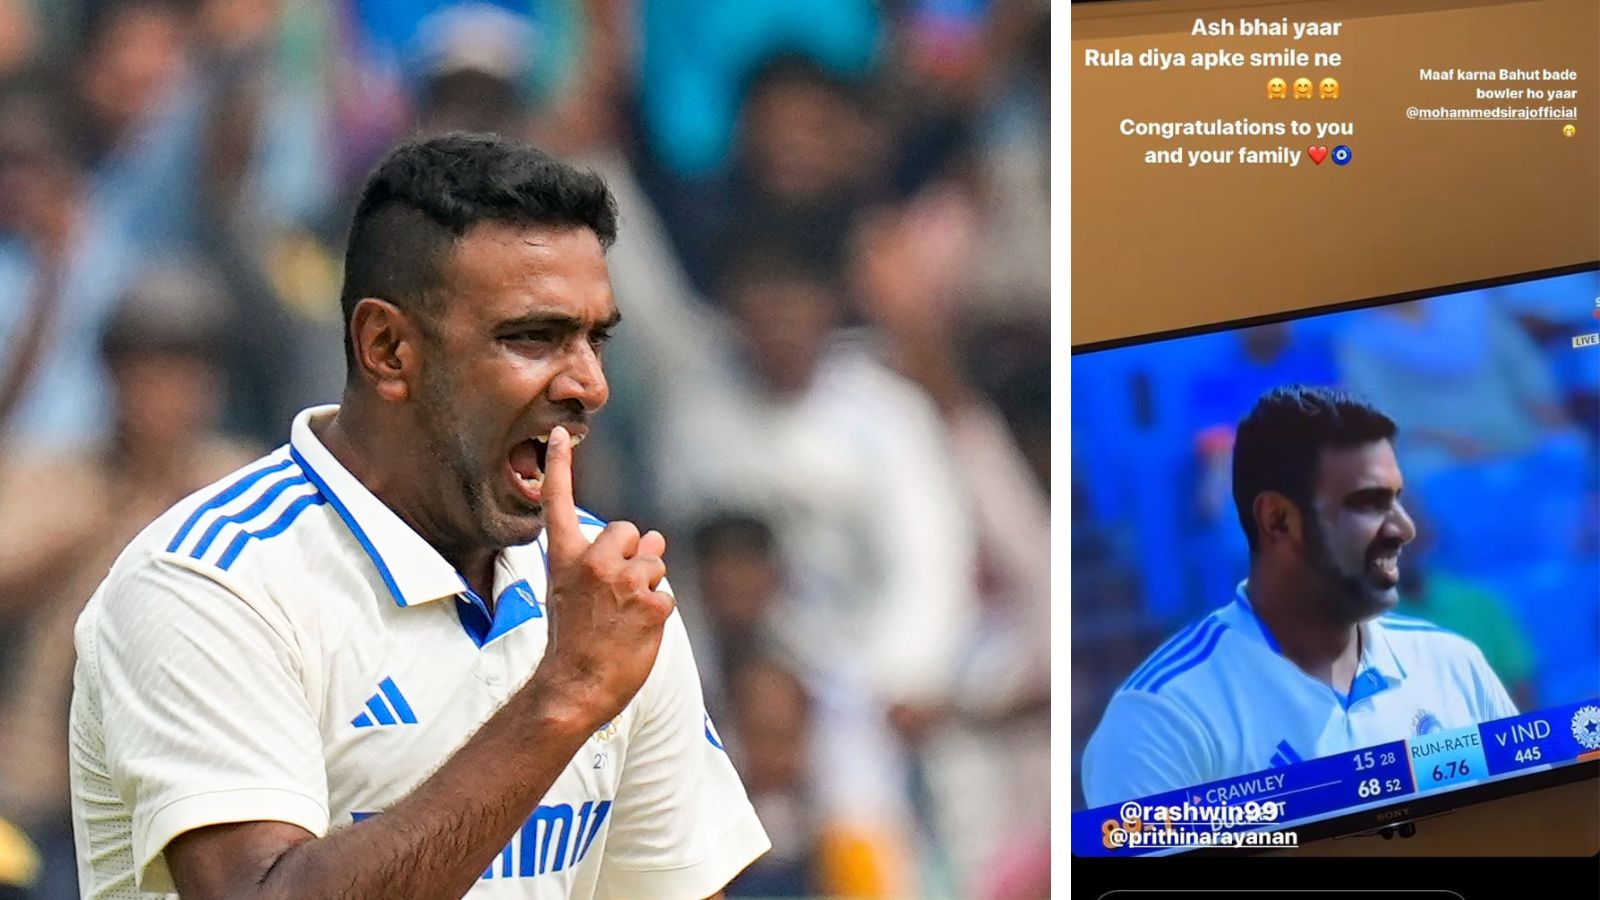 android, ‘your smile made me cry’: suryakumar yadav’s emotional message to r ashwin